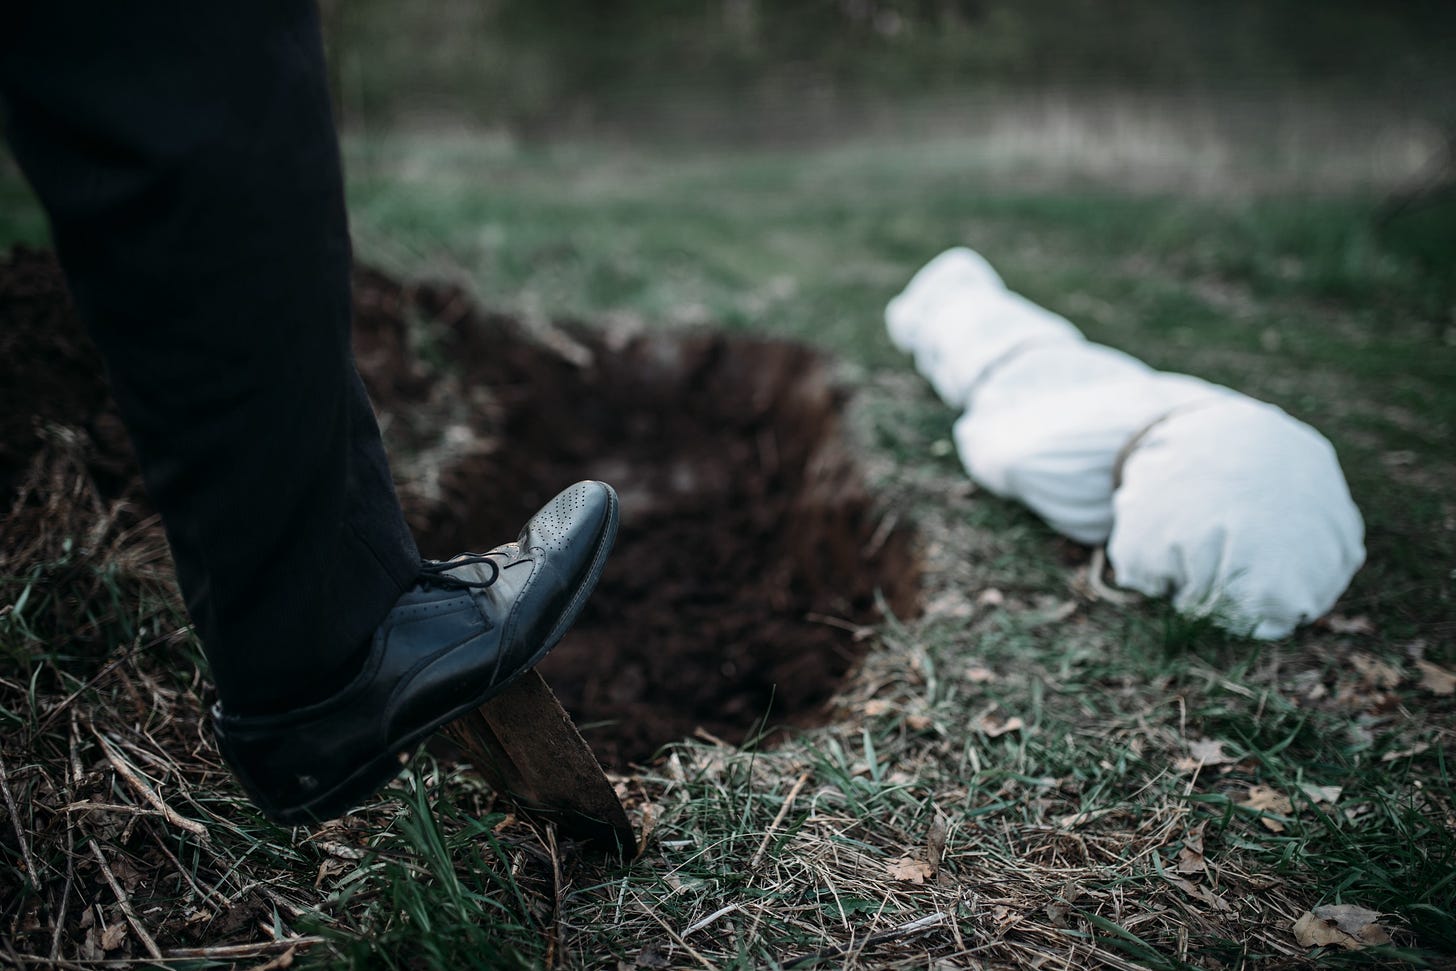 A man in dress shoes and slacks buries a wrapped body in the wilderness.